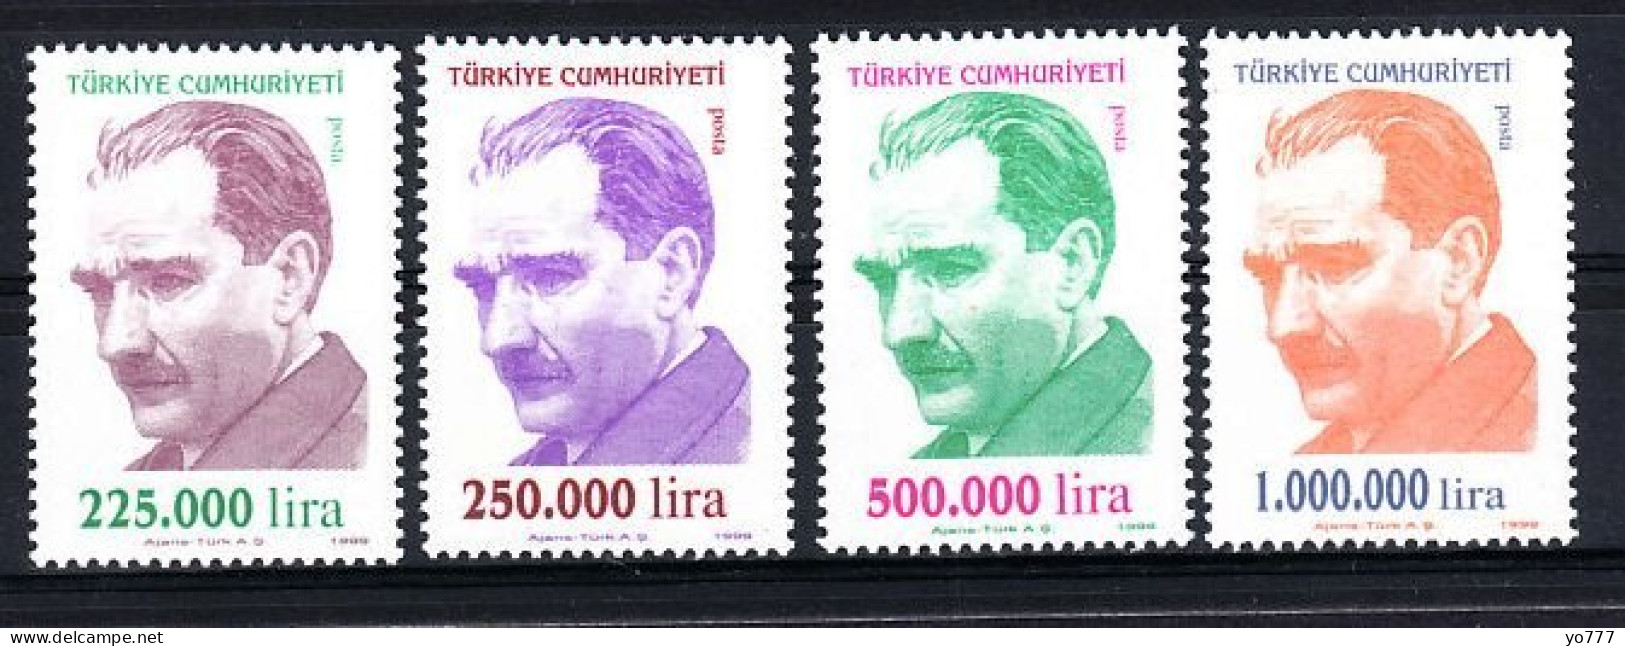 (3197-00) TURKEY REGULAR ISSUE STAMPS WITH THE PORTRAIT OF ATATURK MNH** - Nuovi